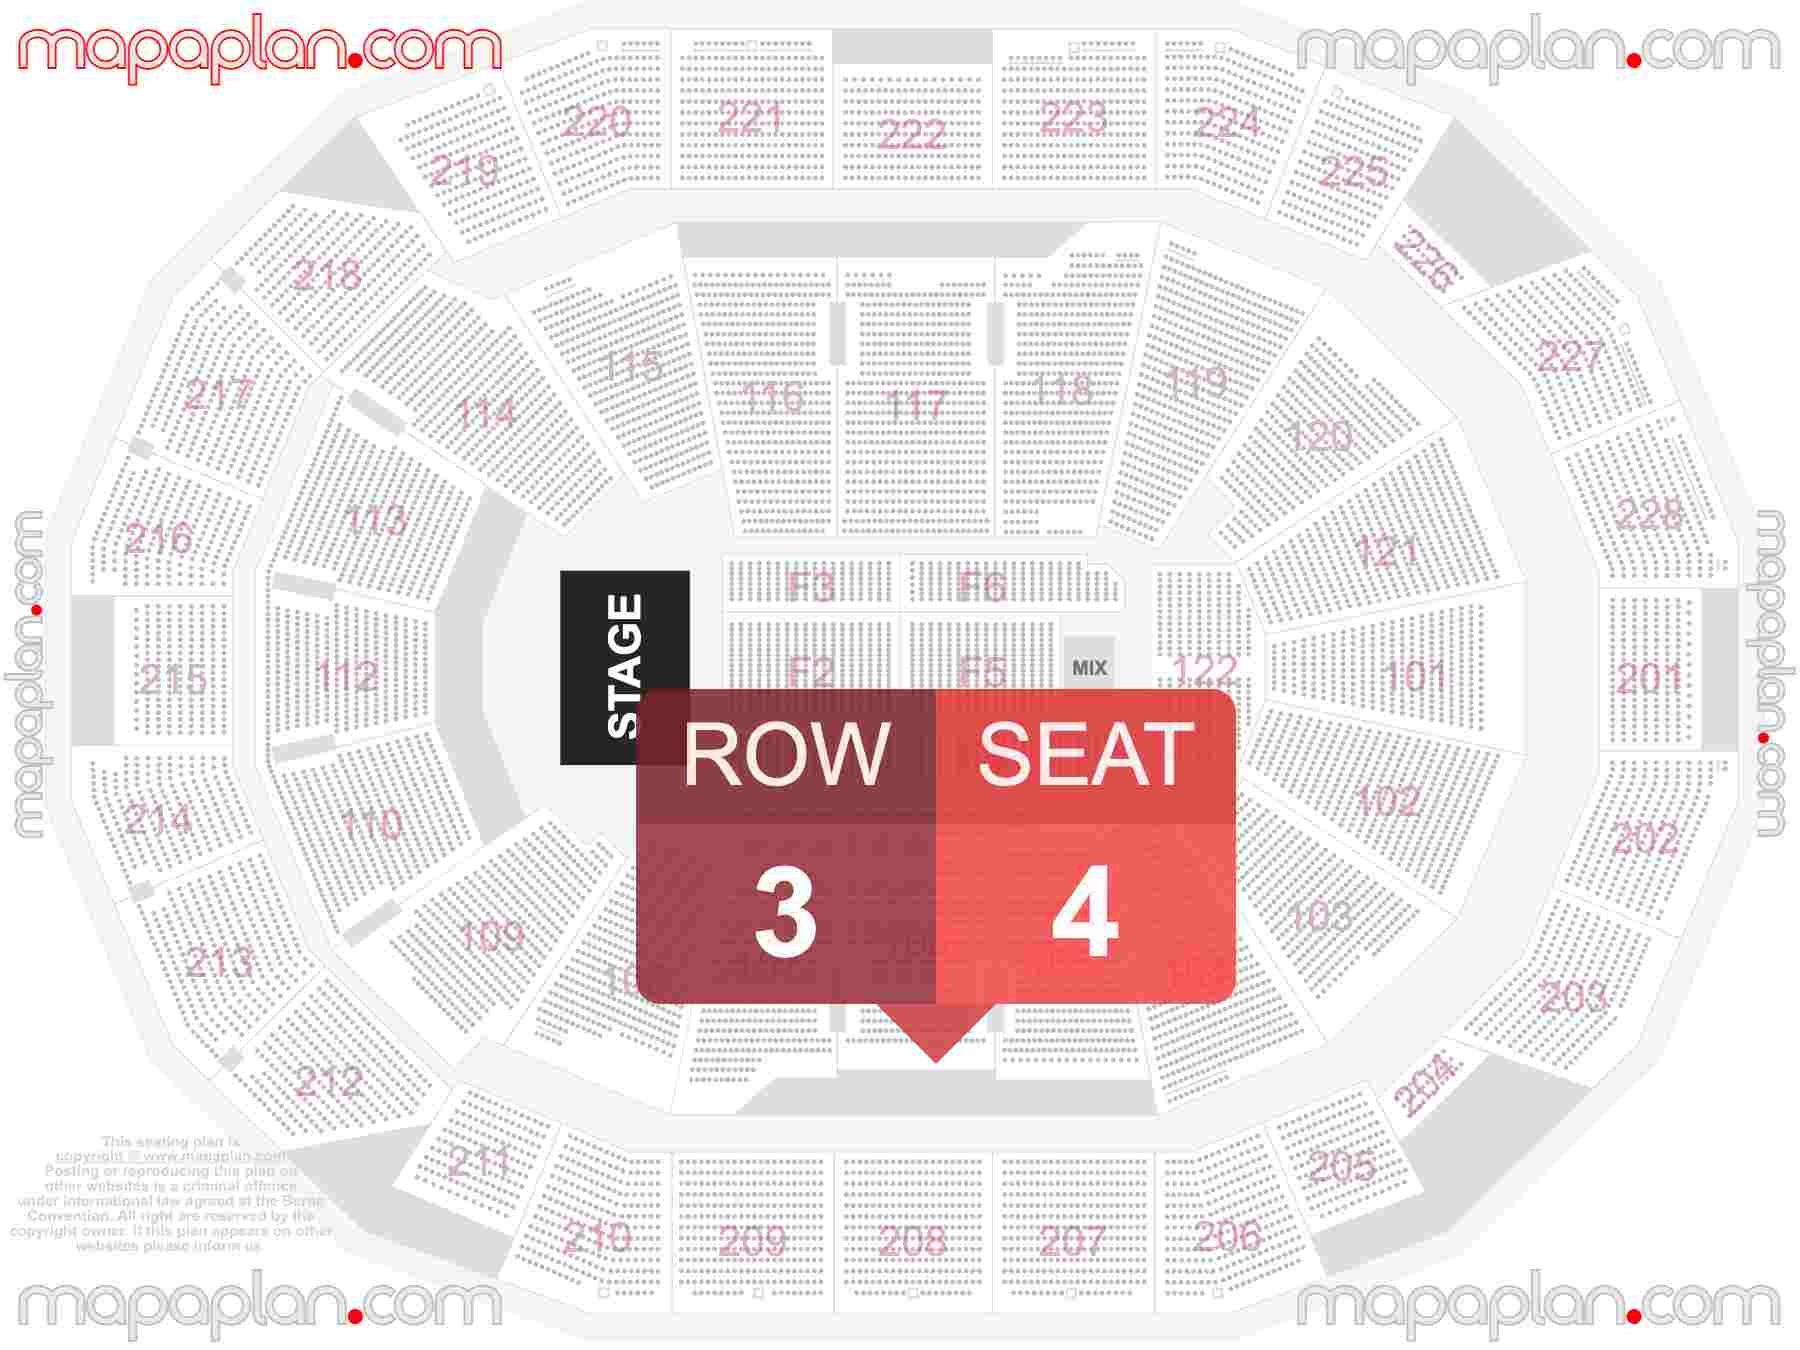 Milwaukee Fiserv Forum seating chart Concert detailed seat numbers and row numbering chart with interactive map plan layout